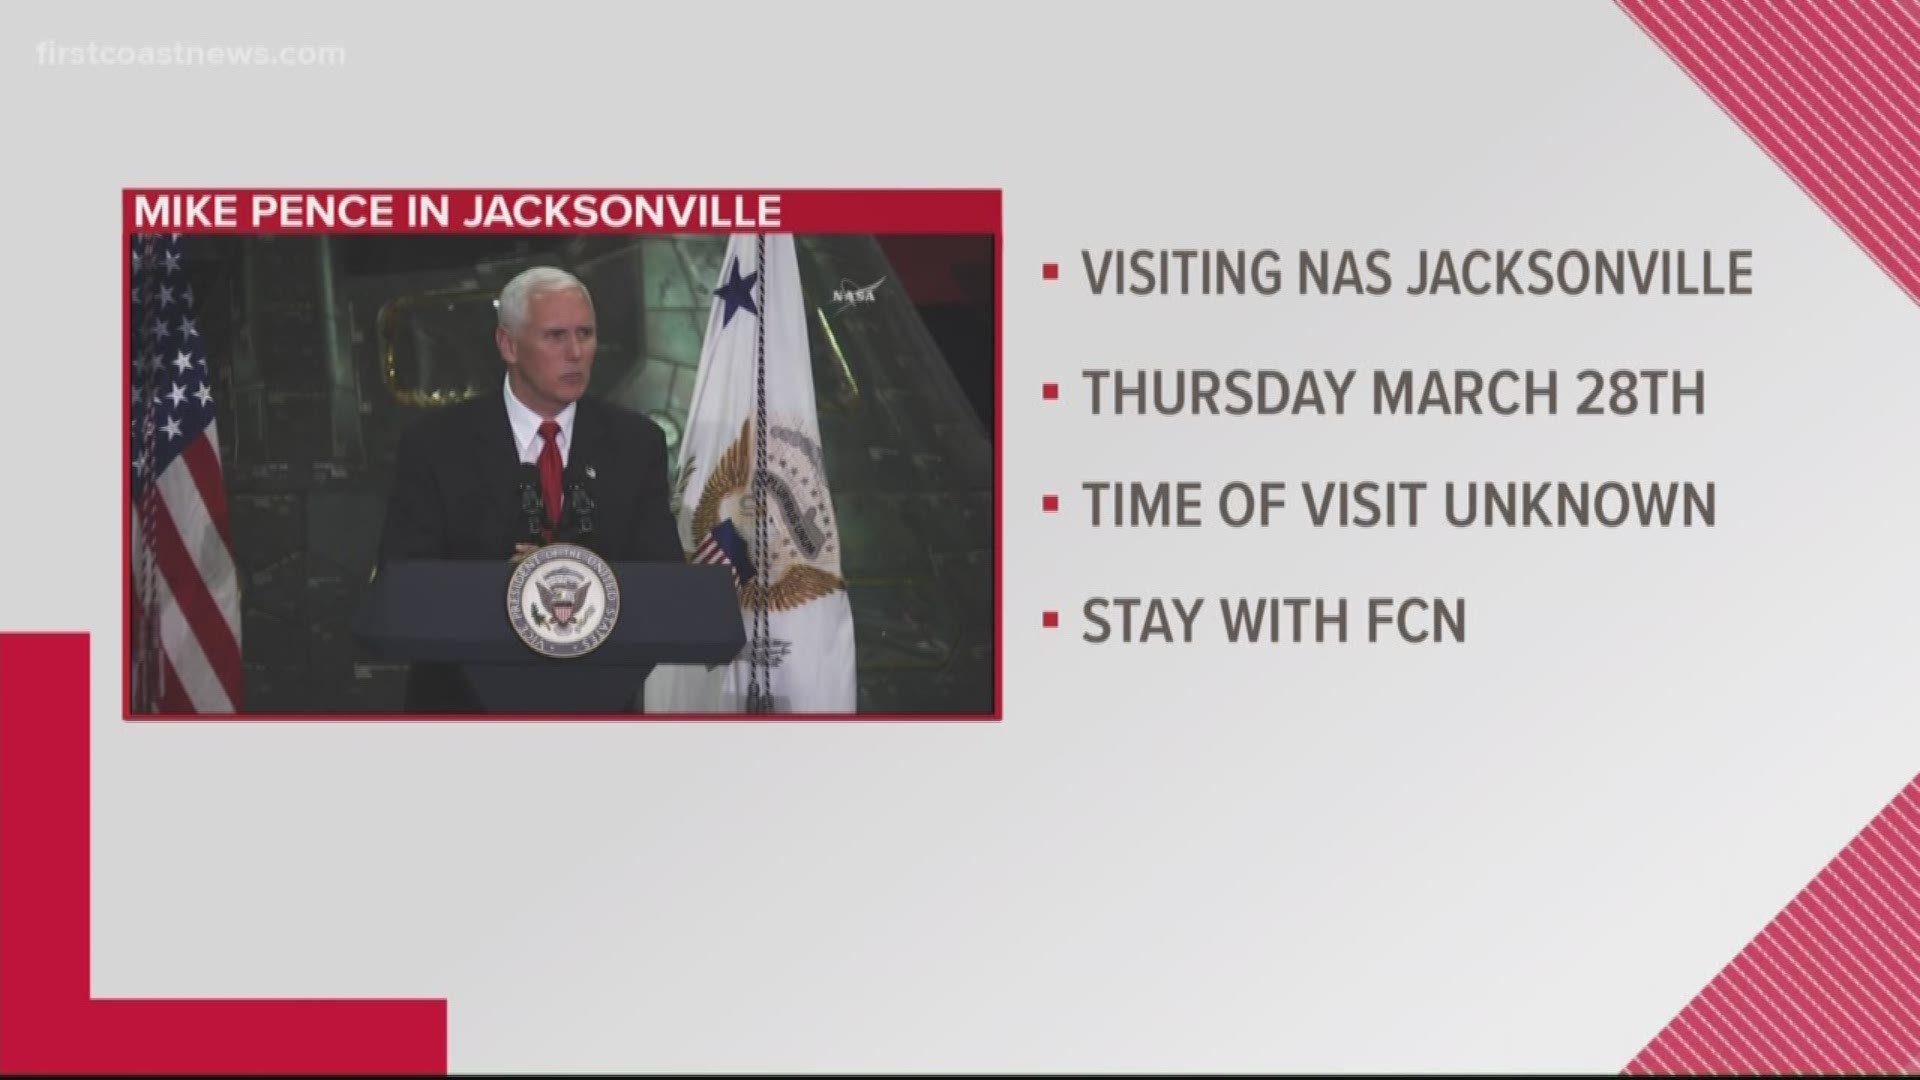 Vice President Mike Pence is expected to visit Jacksonville Thursday evening, sources tell First Coast News.